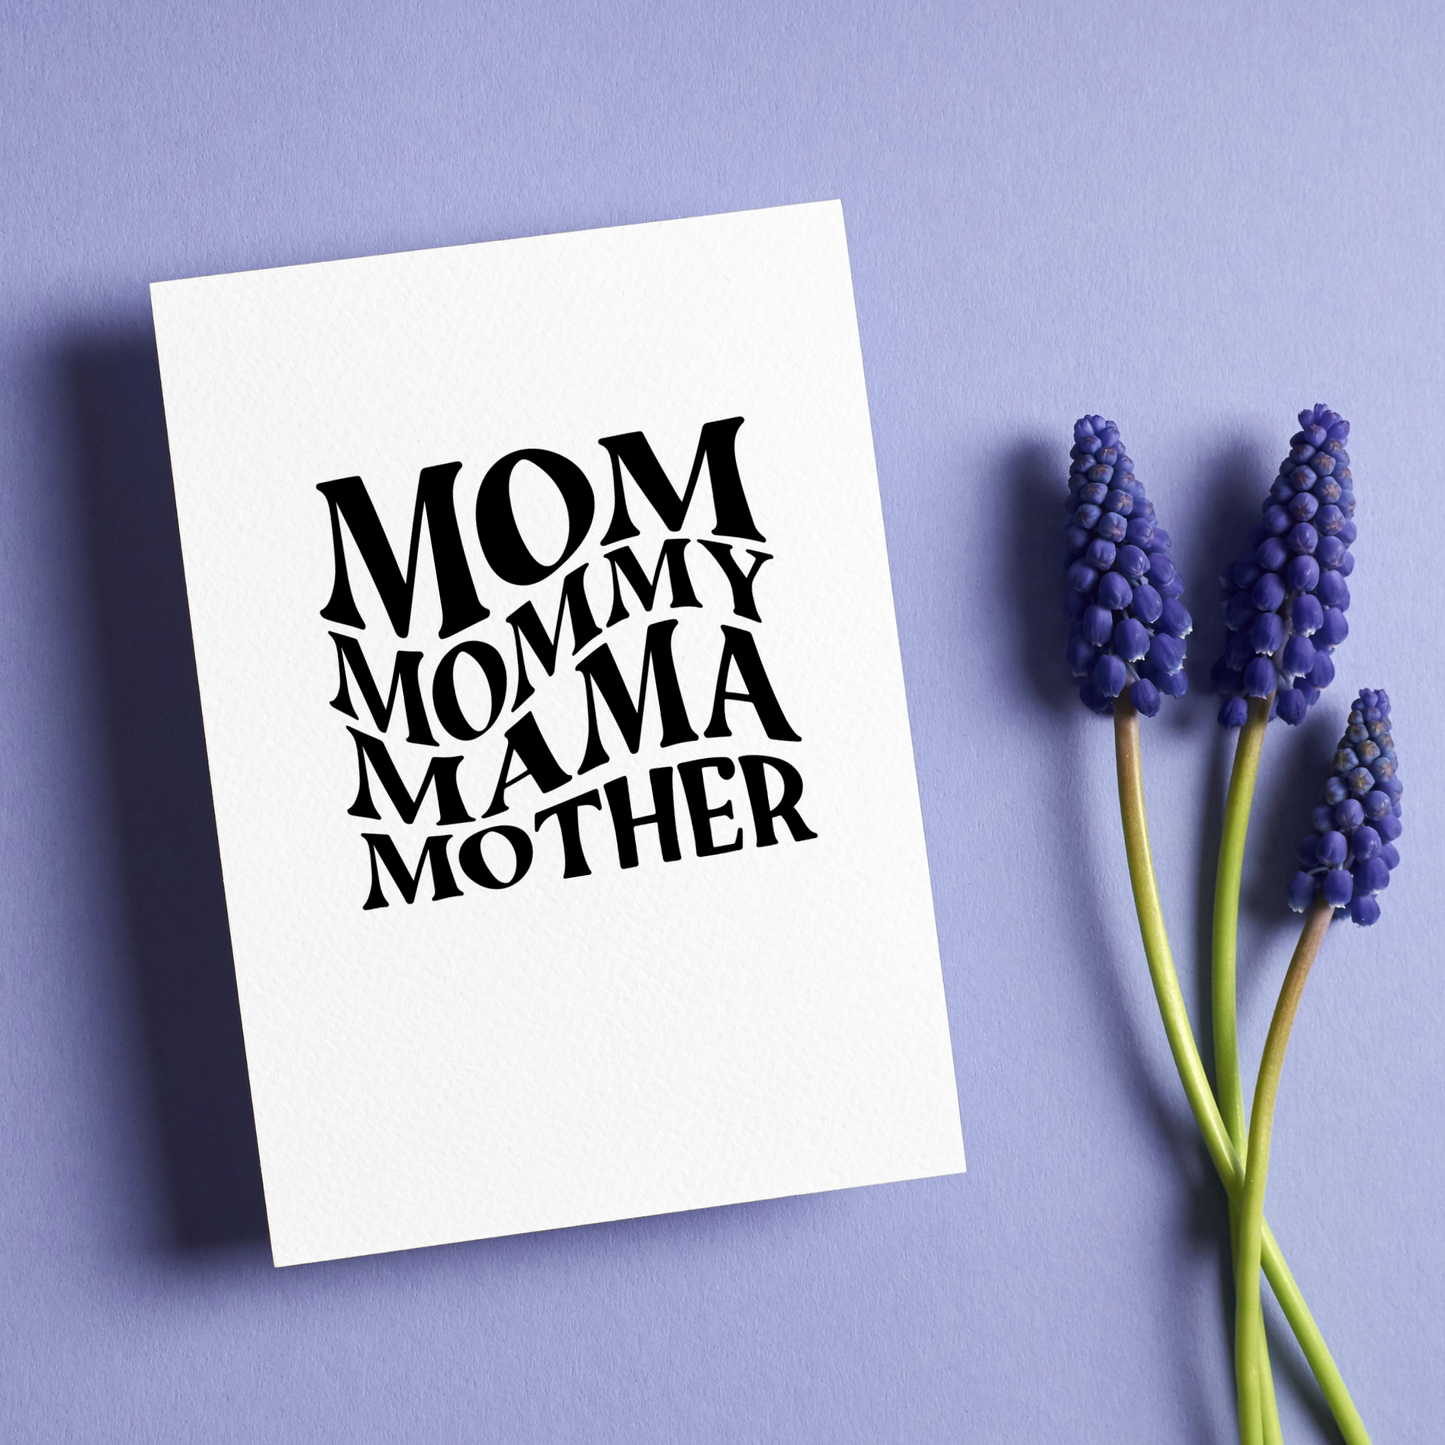 Mom Mommy Mama Mother | Greeting Card